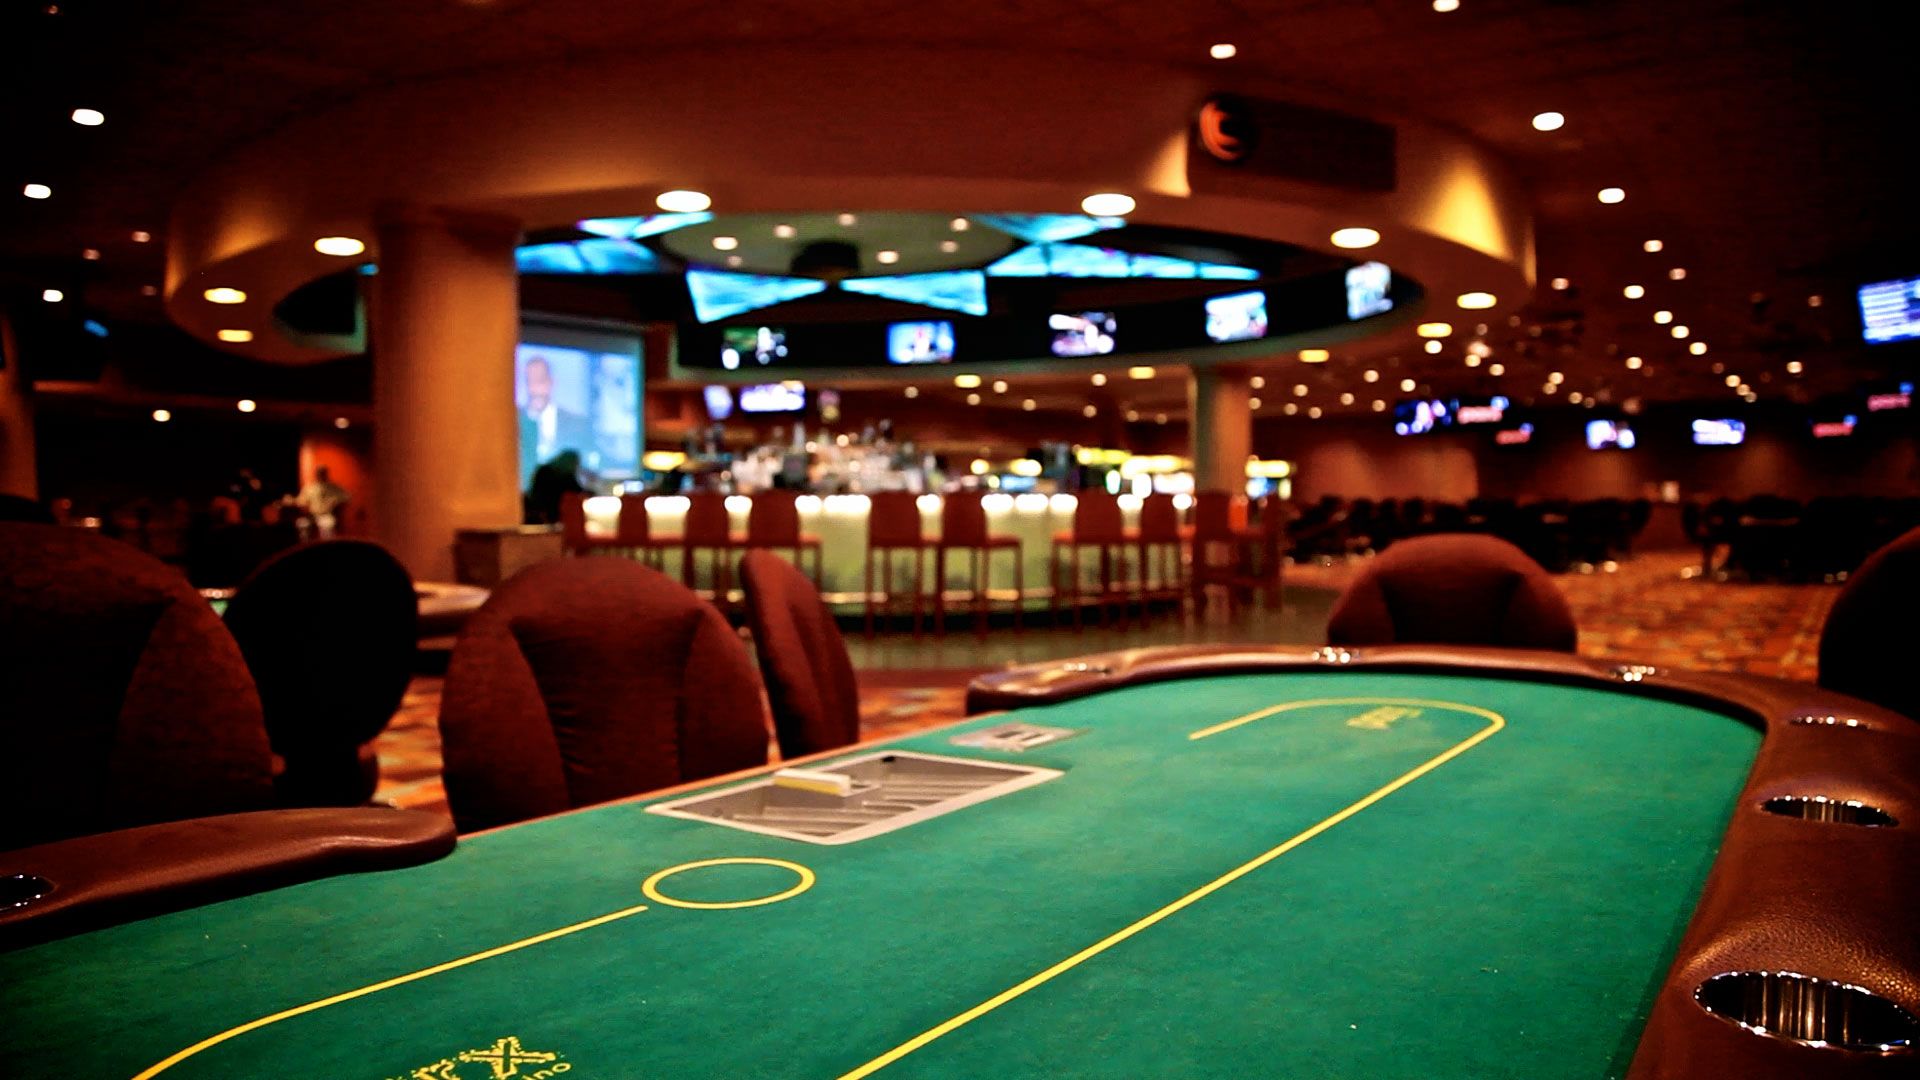 The Advantage of Online Gambling Over Traditional Casinos